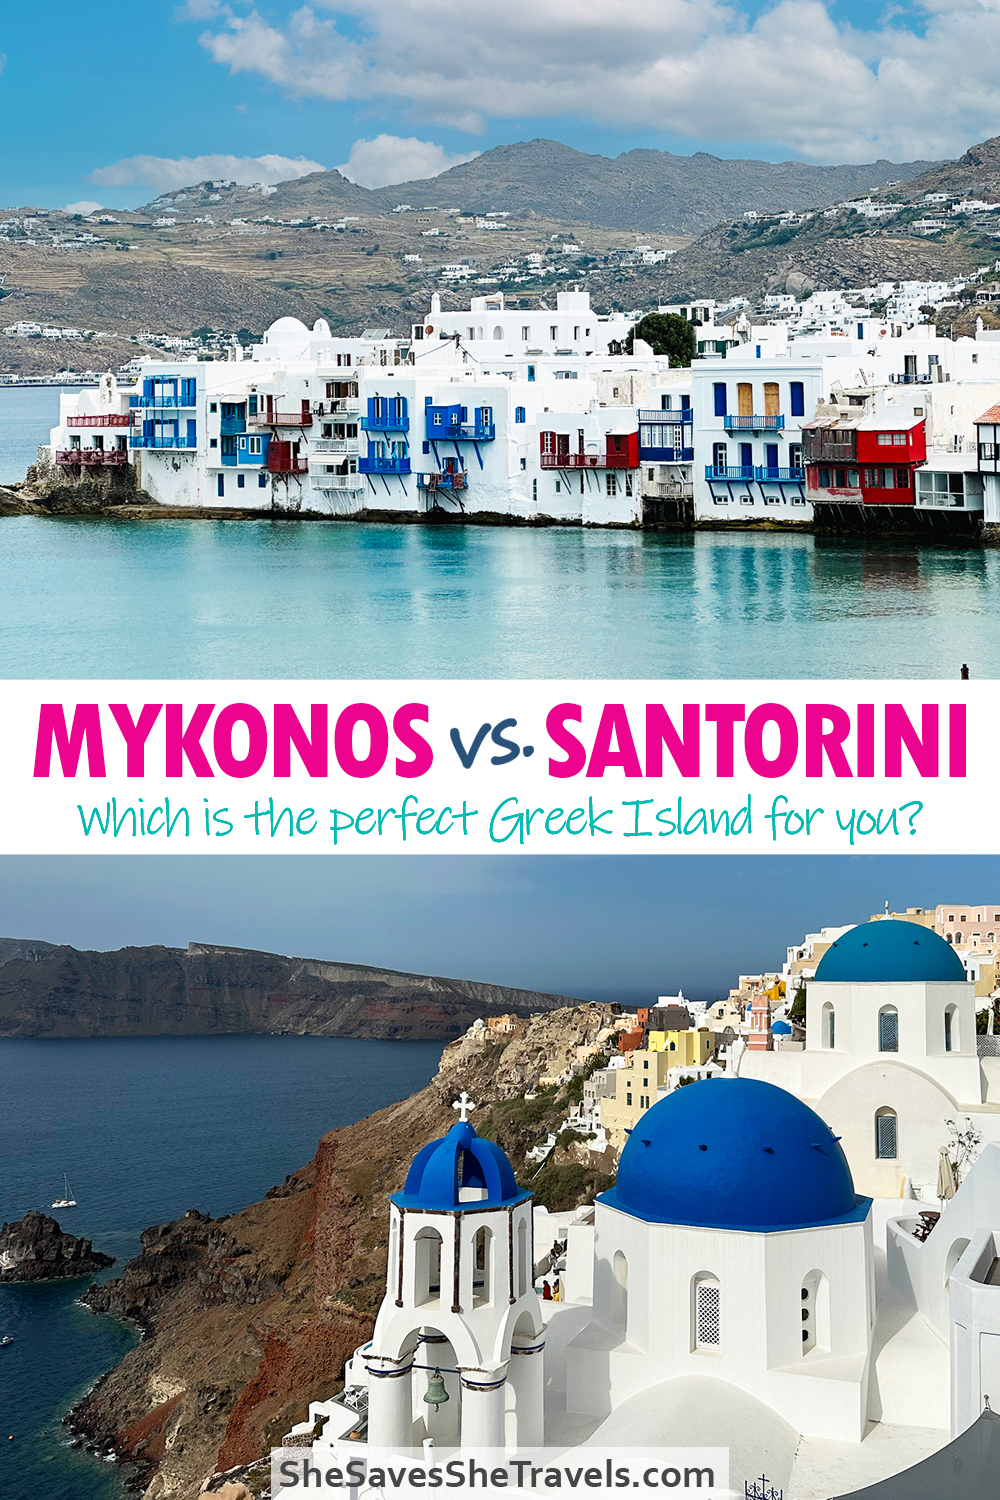 Mykonos vs. Santorini which is the perfect greek island for you? with two images of buildings along sea at top and blue domed churches on cliff at bottom